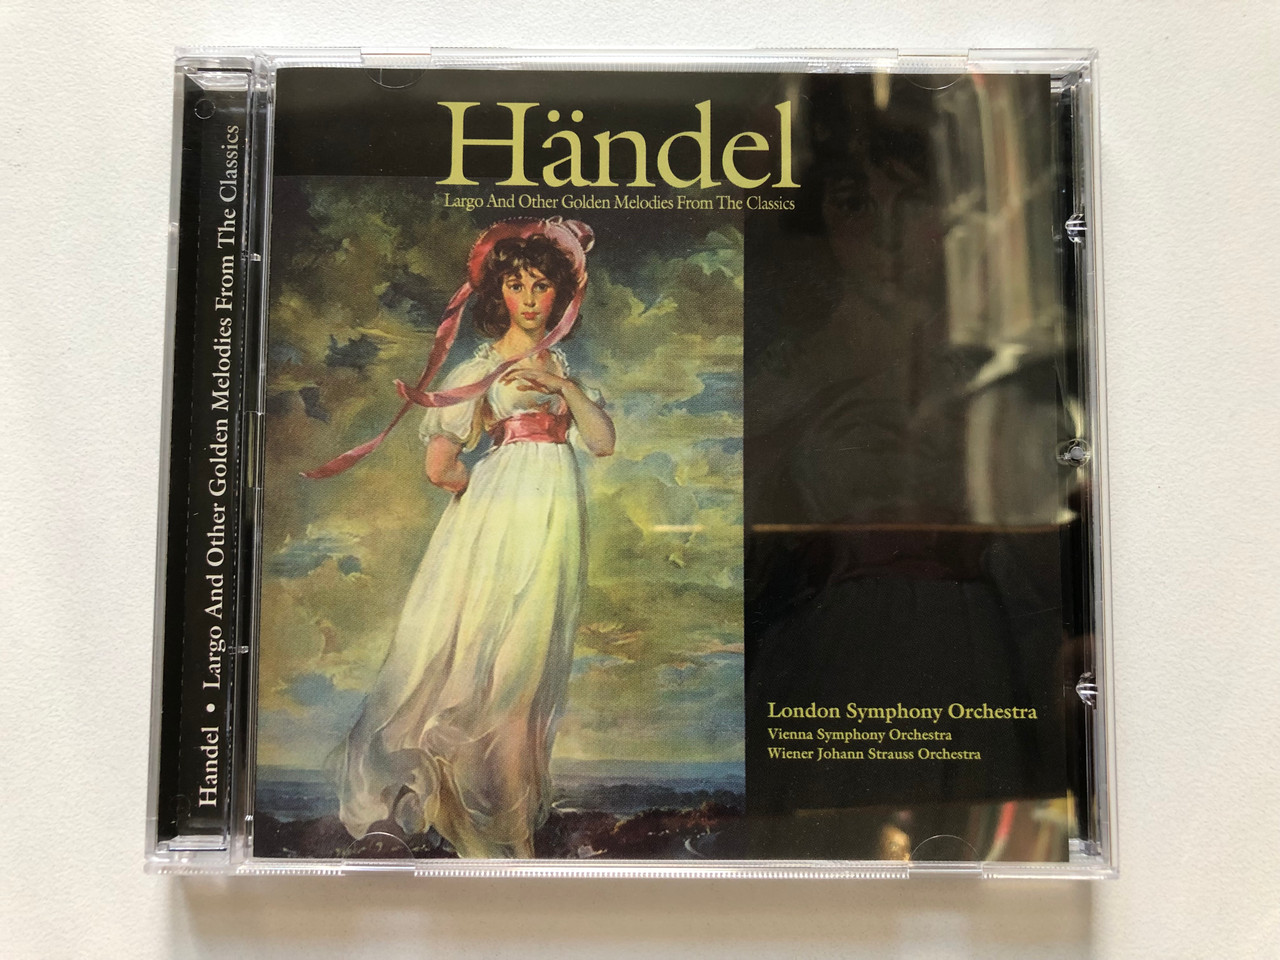 https://cdn10.bigcommerce.com/s-62bdpkt7pb/products/0/images/307767/Handel_Largo_And_Other_Golden_Melodies_From_The_Classics_-_London_Symphony_Orchestra_Vienna_Symphony_Orchestra_Wiener_Johann_Strauss_Orchestra_A-Play_Classics_Audio_CD_1998_9034-2_1__36070.1698847503.1280.1280.JPG?c=2